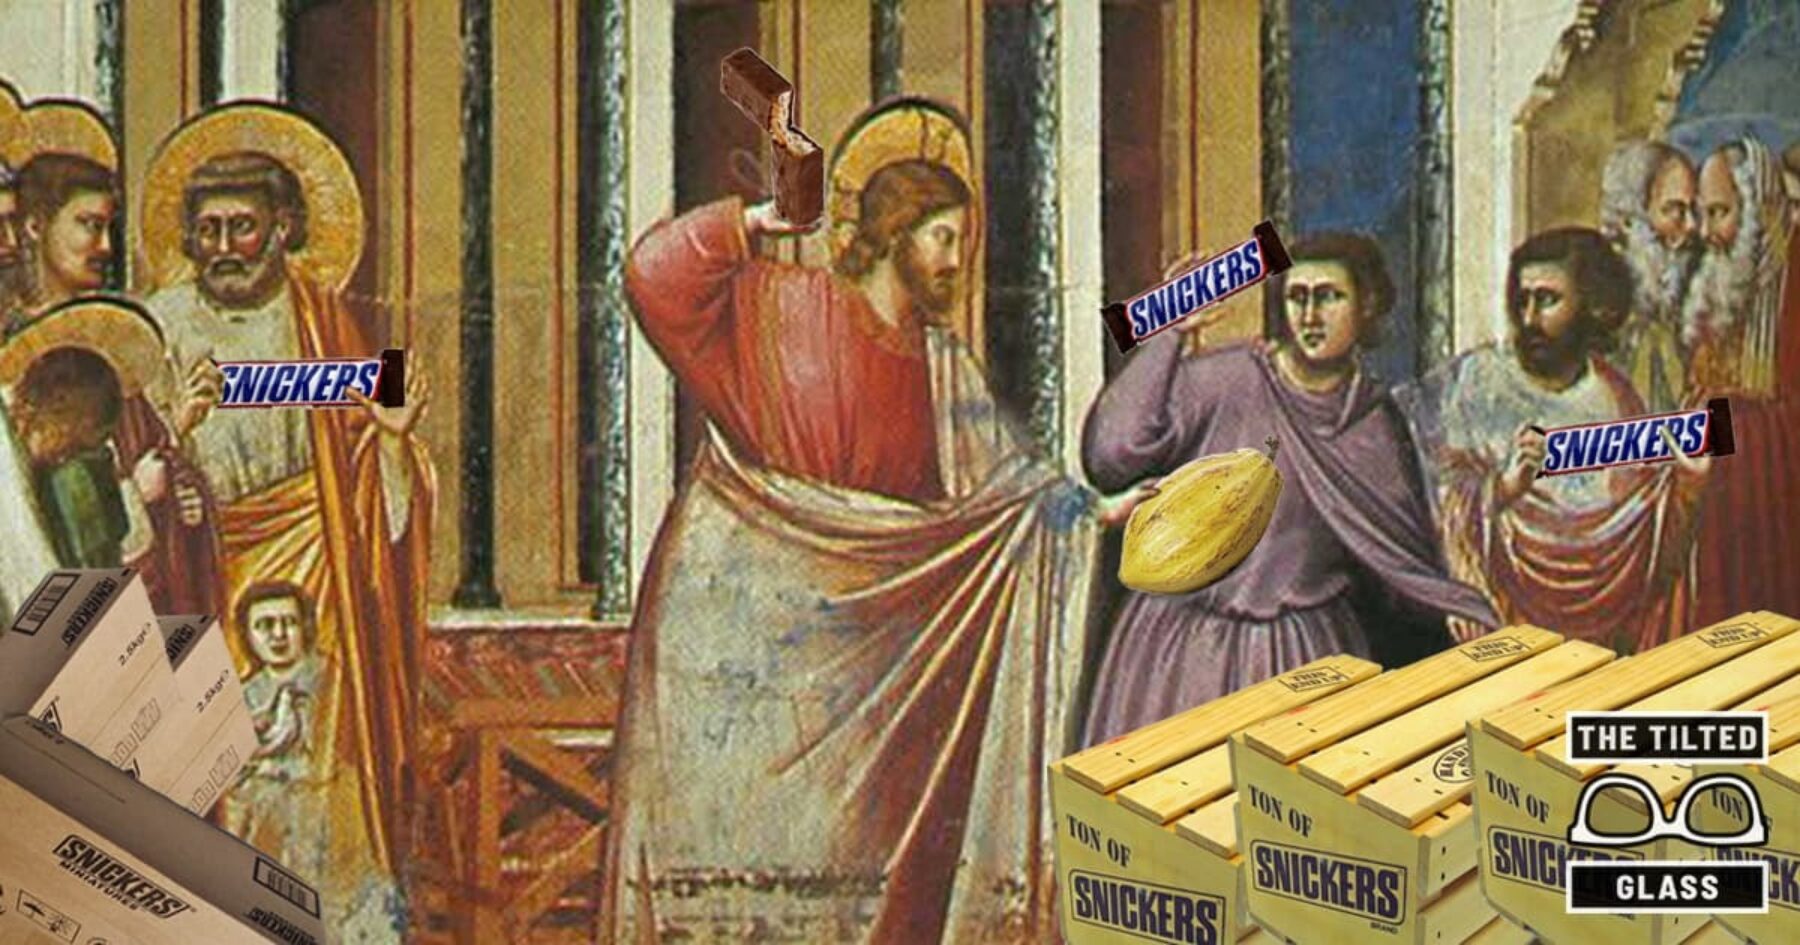 Jesus Throws Out Snickers Bars From the Temple, Says Cacao is Sacred